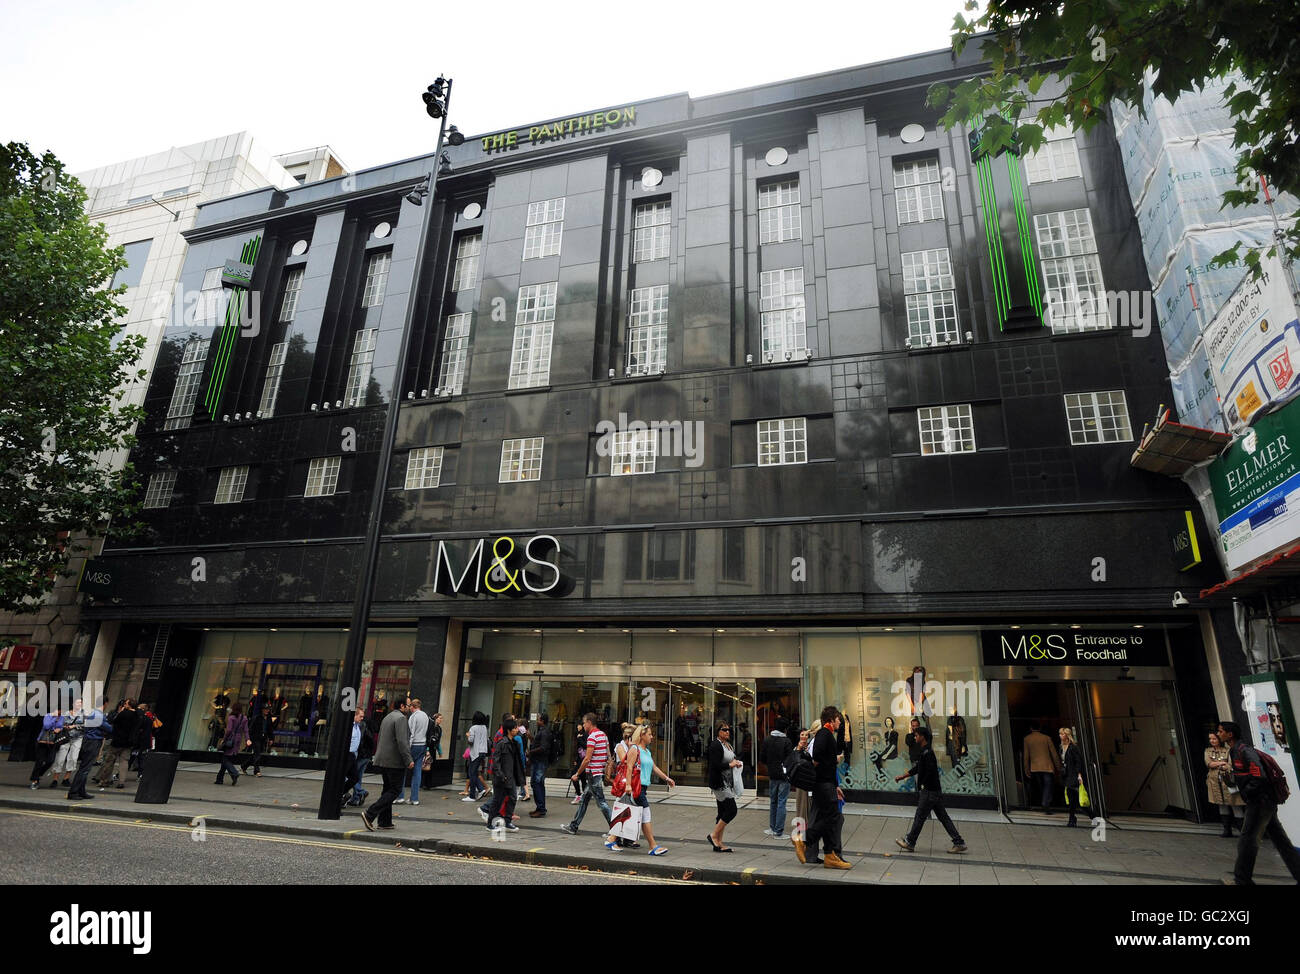 The Marks & Spencer's Pantheon store on London's Oxford Street which has been granted Grade II listed status. Stock Photo